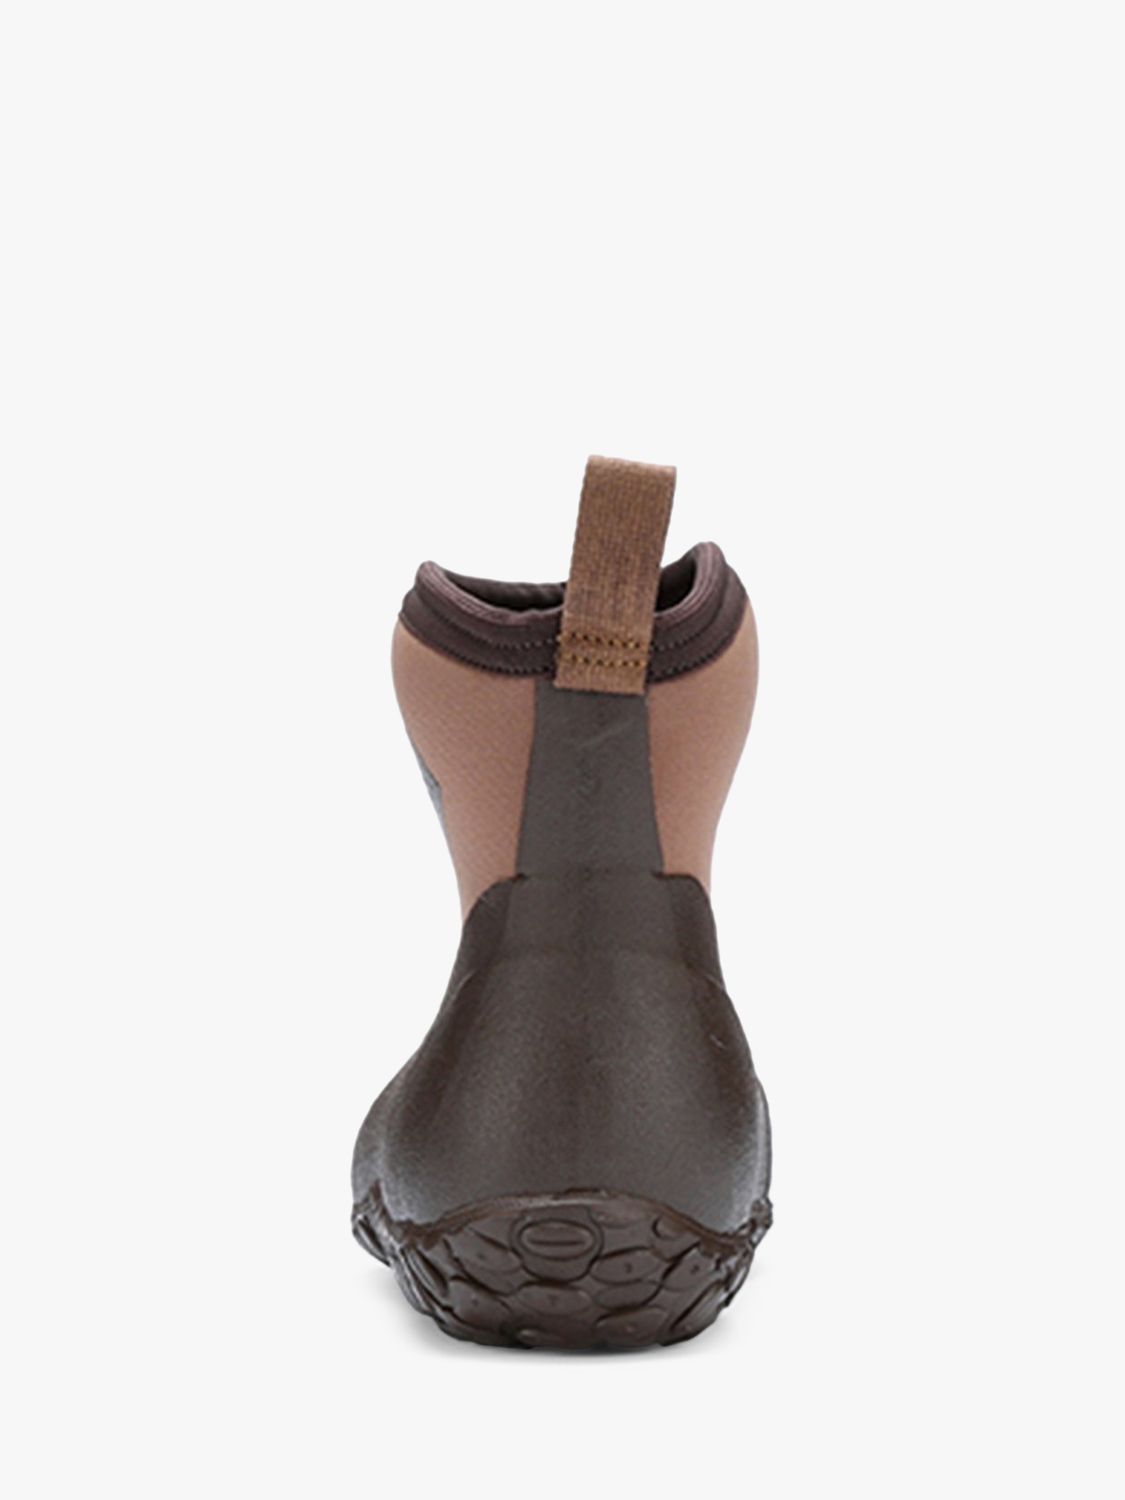 Buy Muck Muckster II Ankle Wellington Boots Online at johnlewis.com